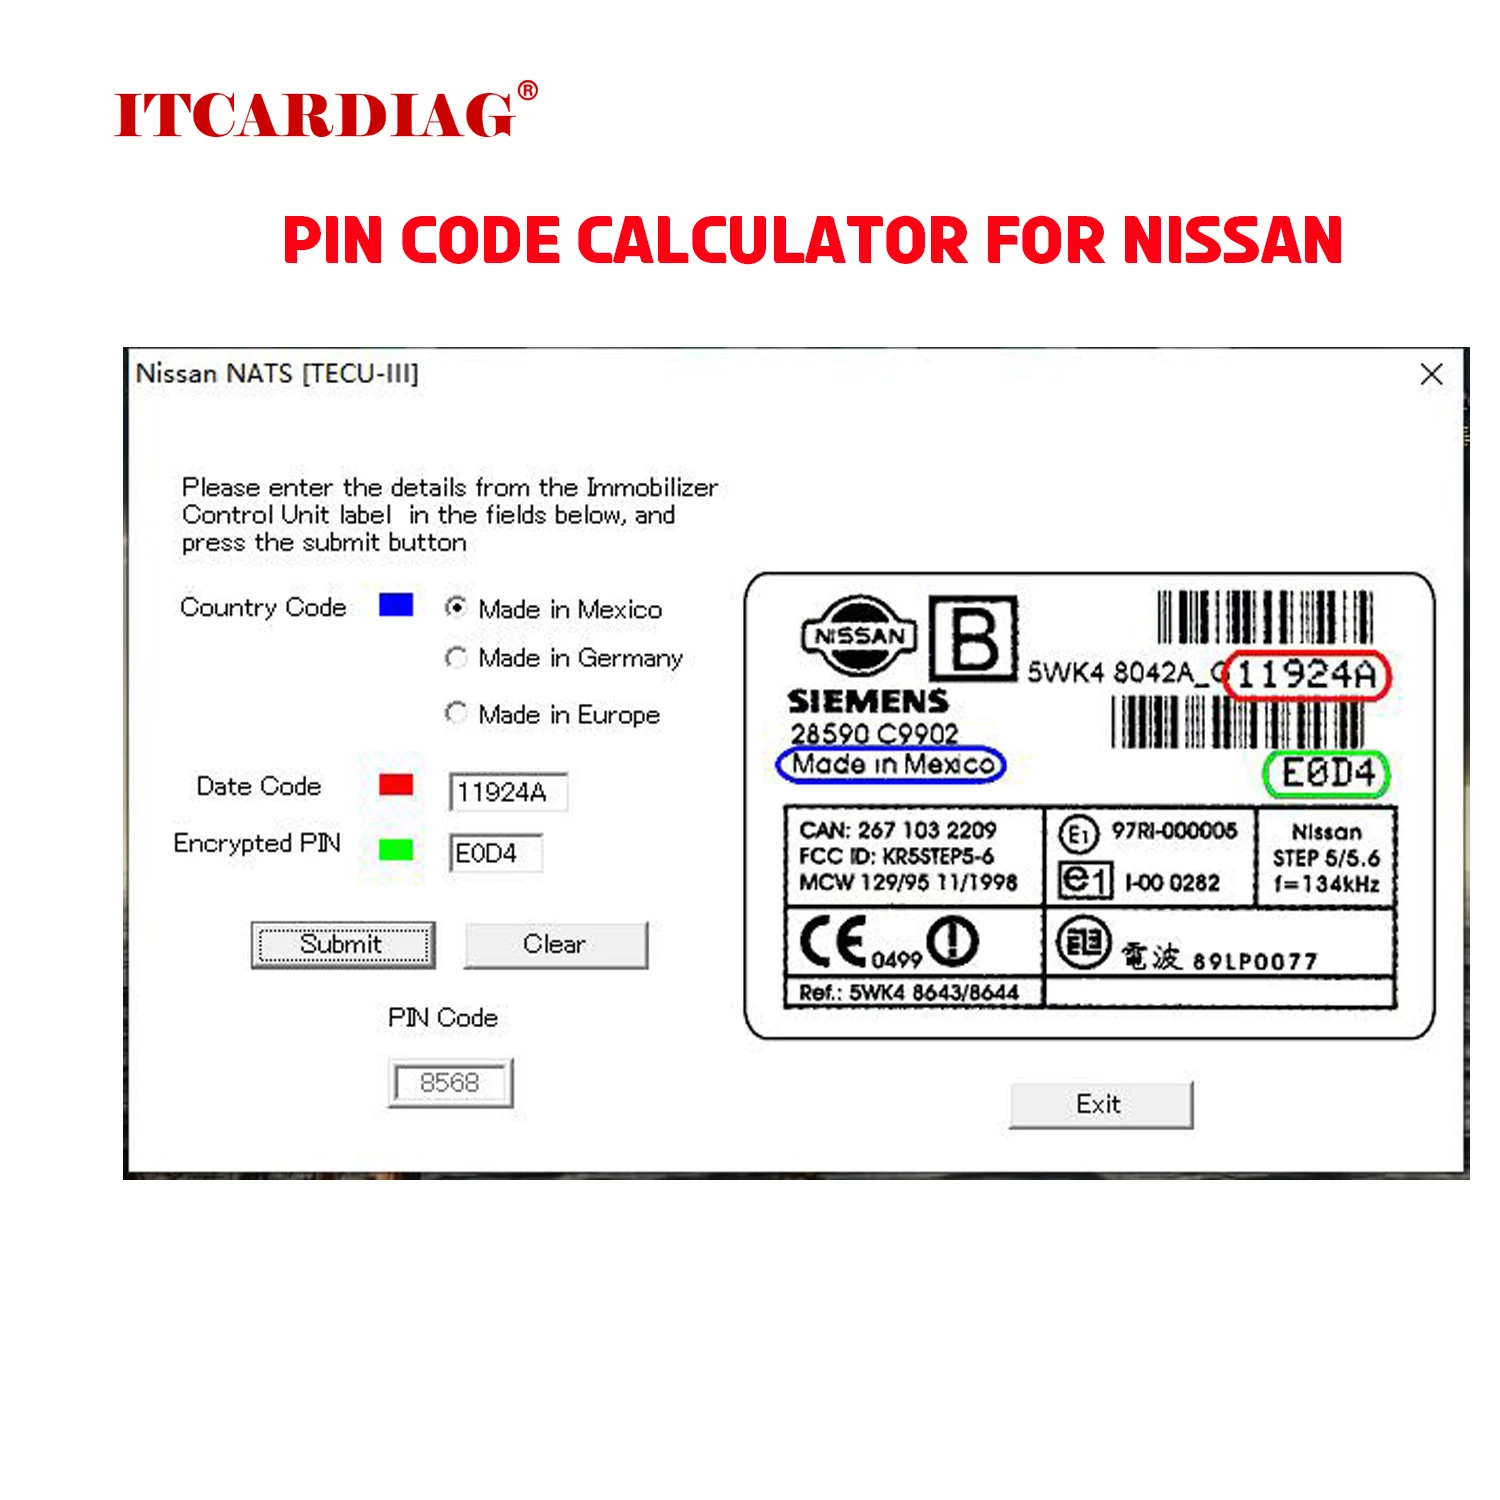 

Pin Code Calculator for Nissan NATS TECU III for Smart Entrance Control Unit and Immobilizer Control Unit